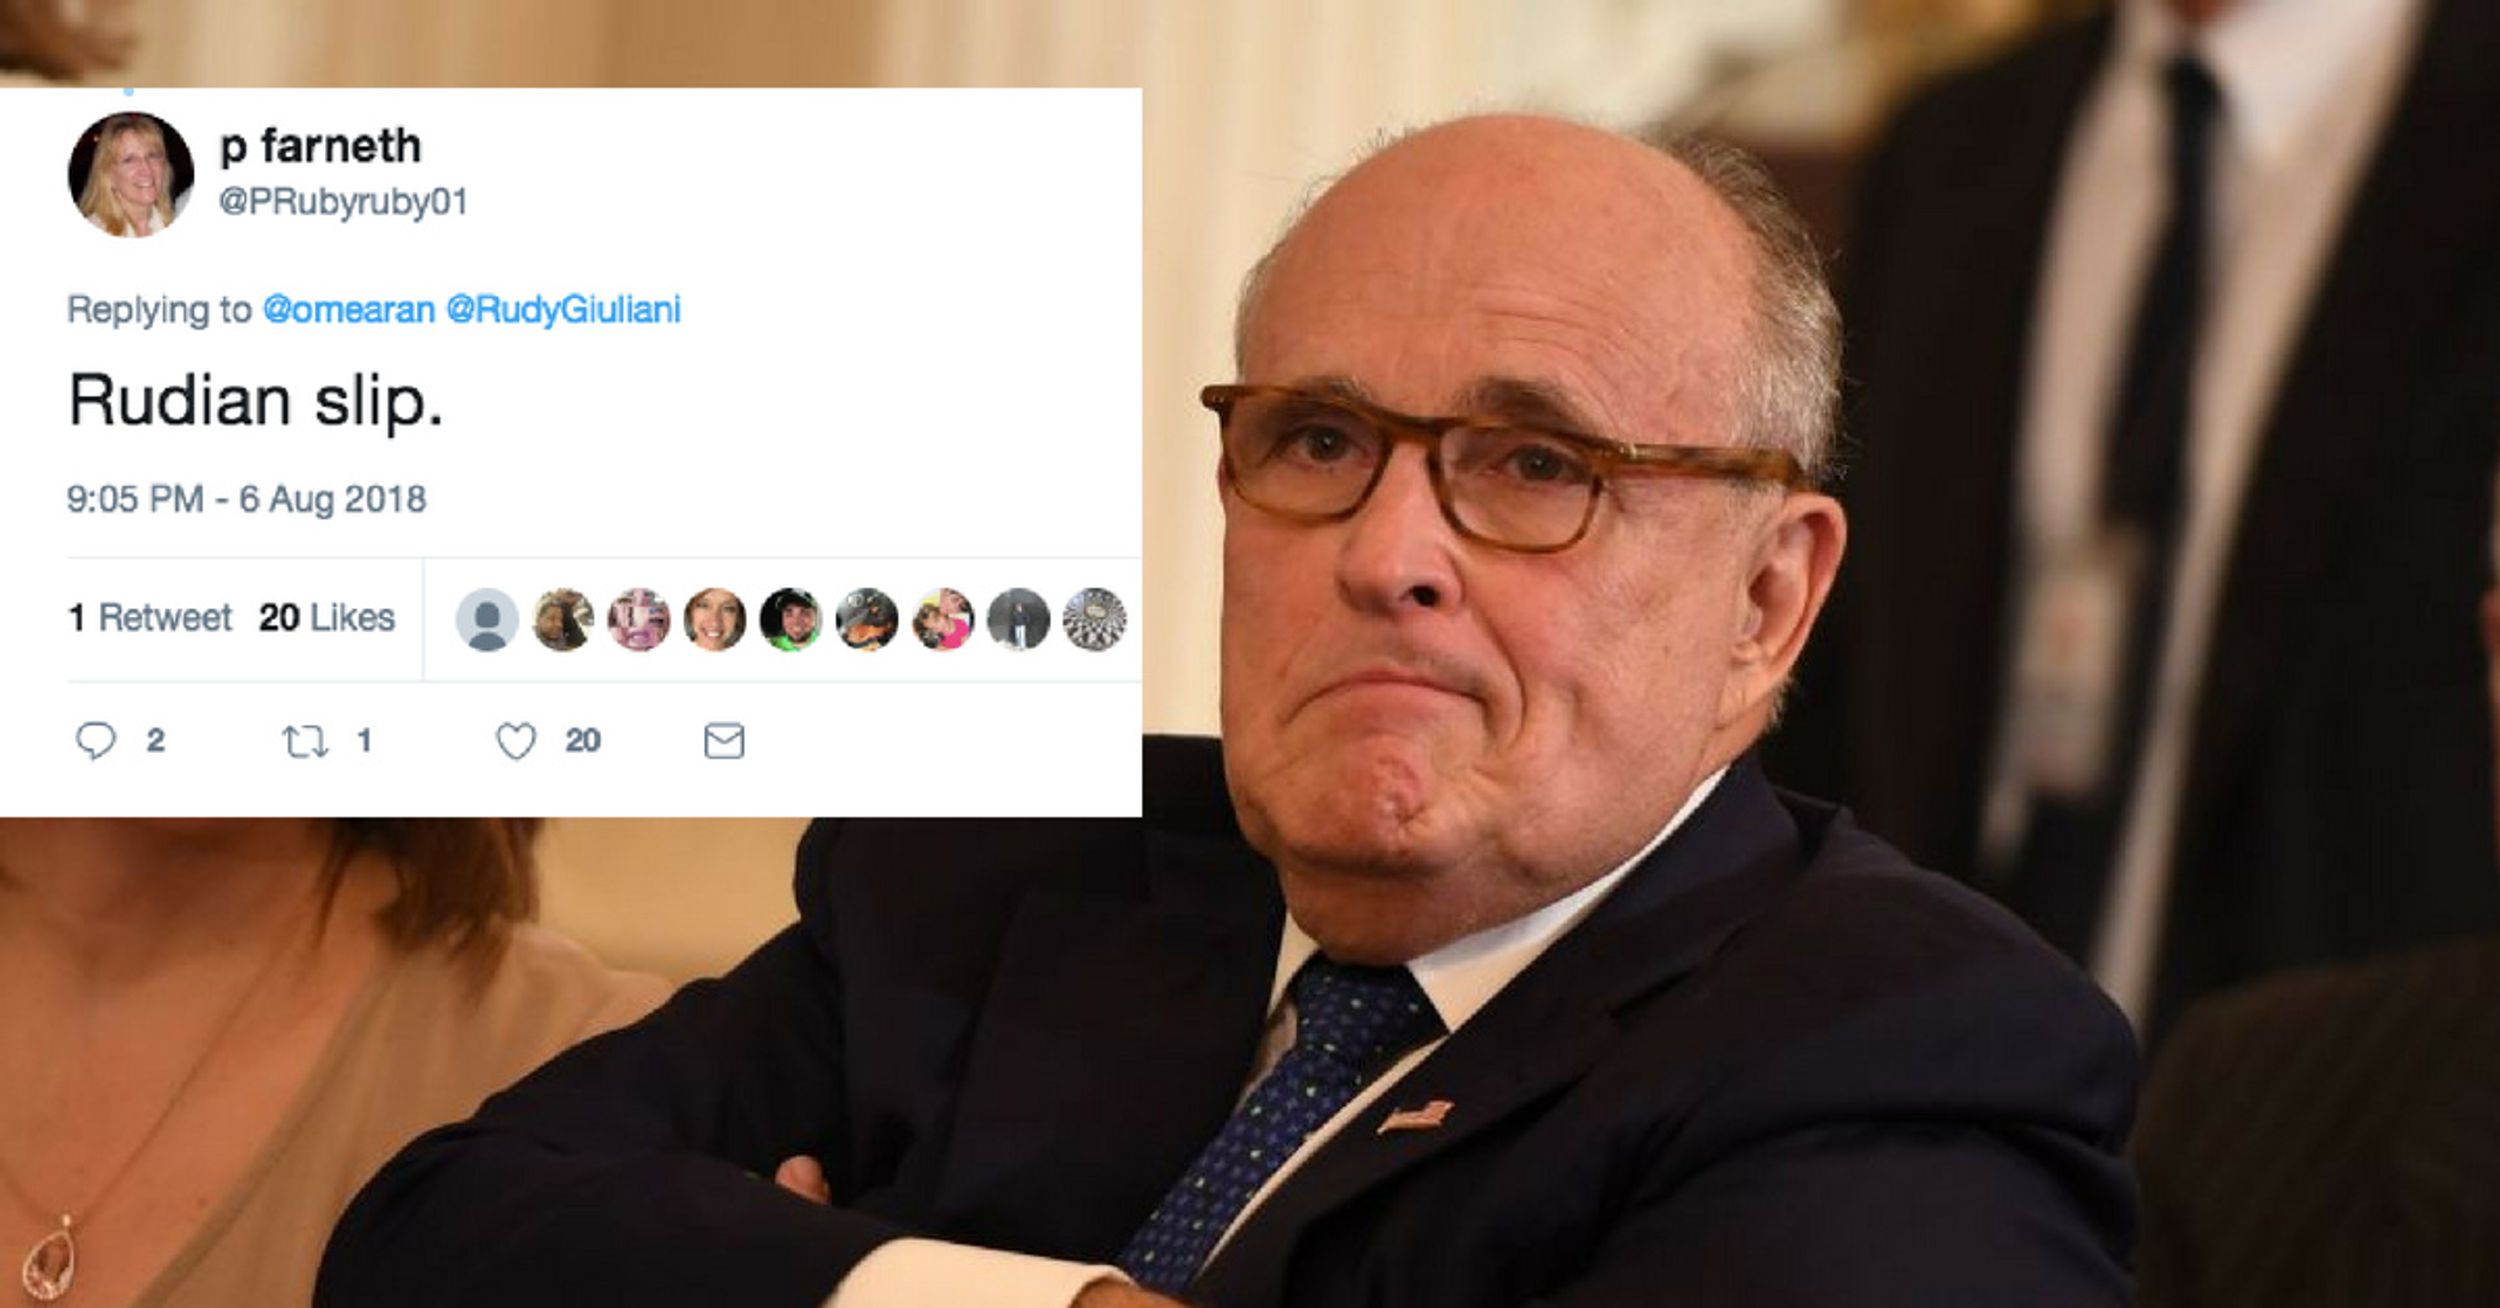 A Typo In Rudy Guiliani's Latest Tweet Led To An Onslaught Of Replies He Probably Wasn't Expecting 😬